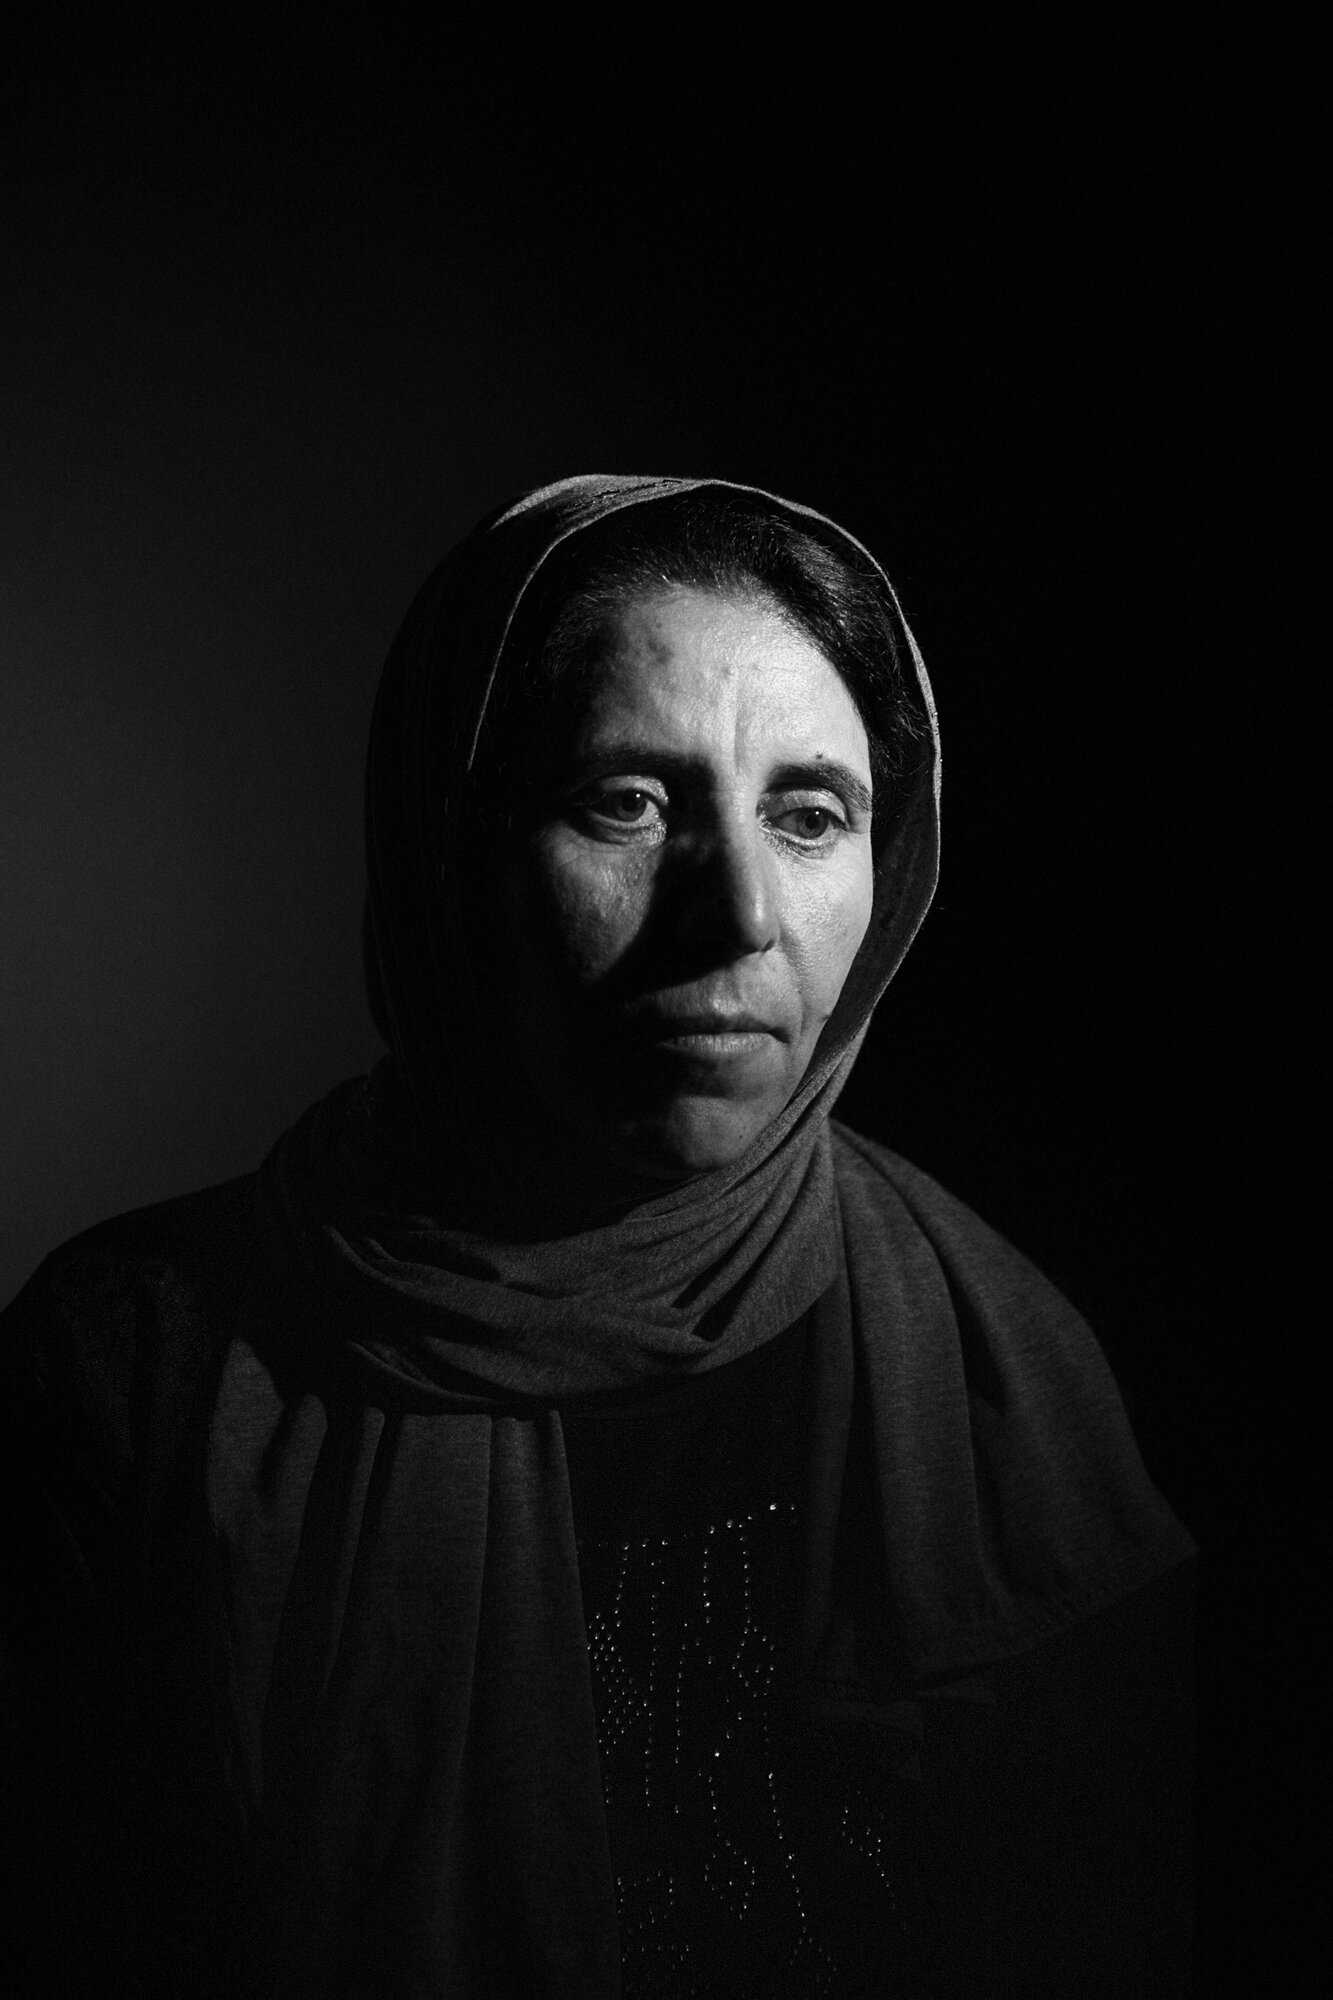  Amina Ammu is 46. She was held captive by ISIS with her two children and a nephew. Iraq, 2019. 